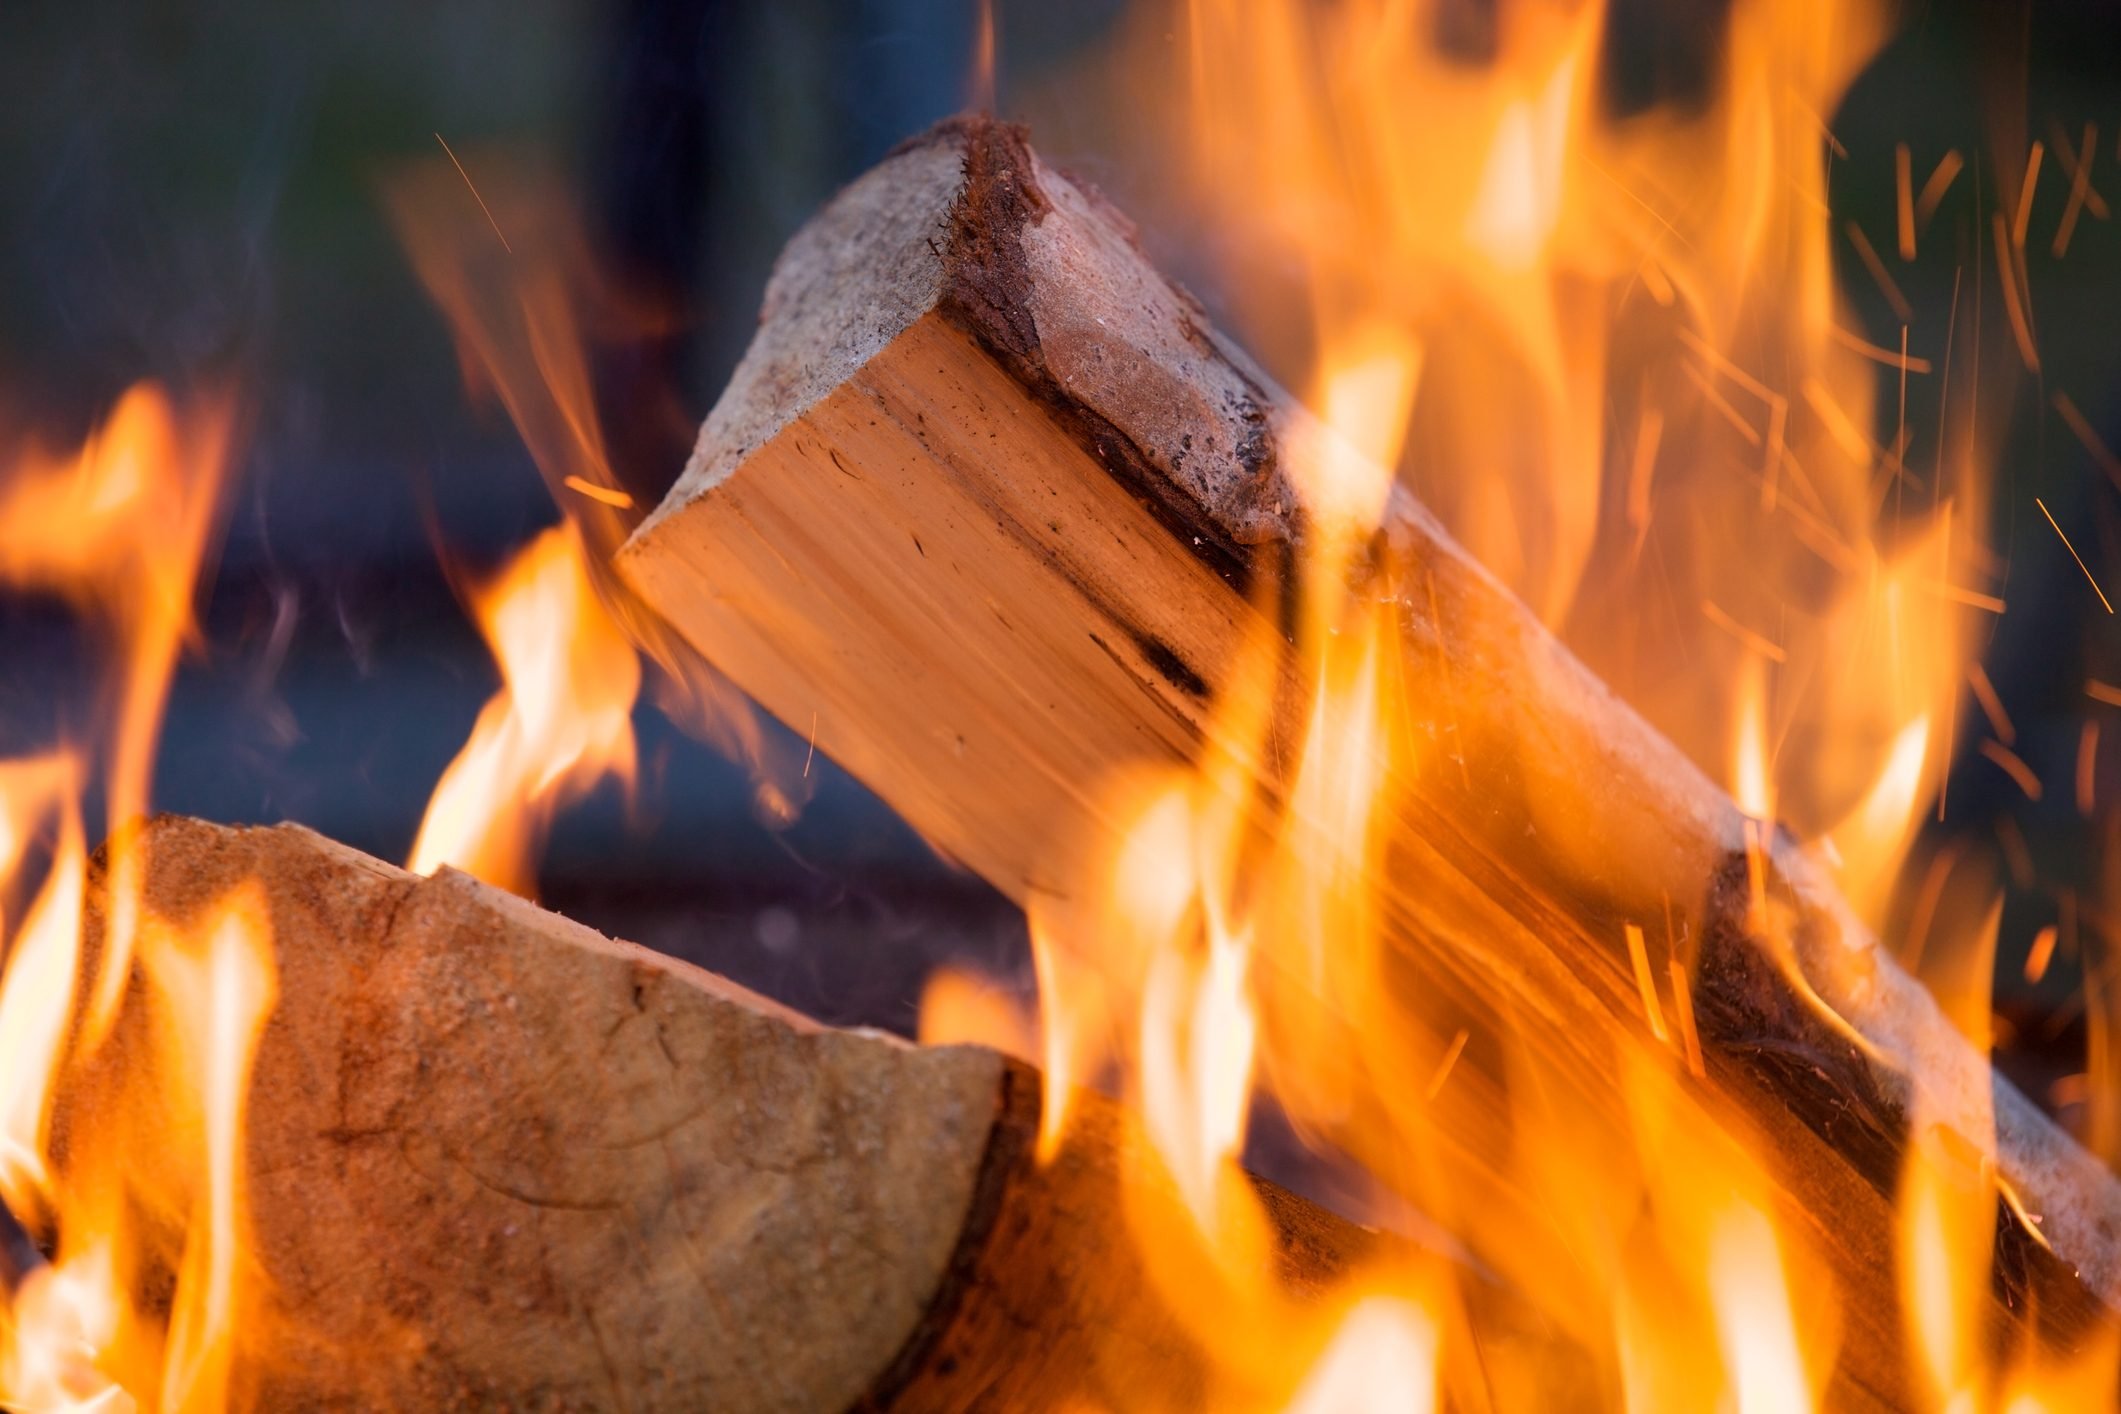 Learn Why Your Fire Wood Isn't Burning - Some Wood Species Burns Best